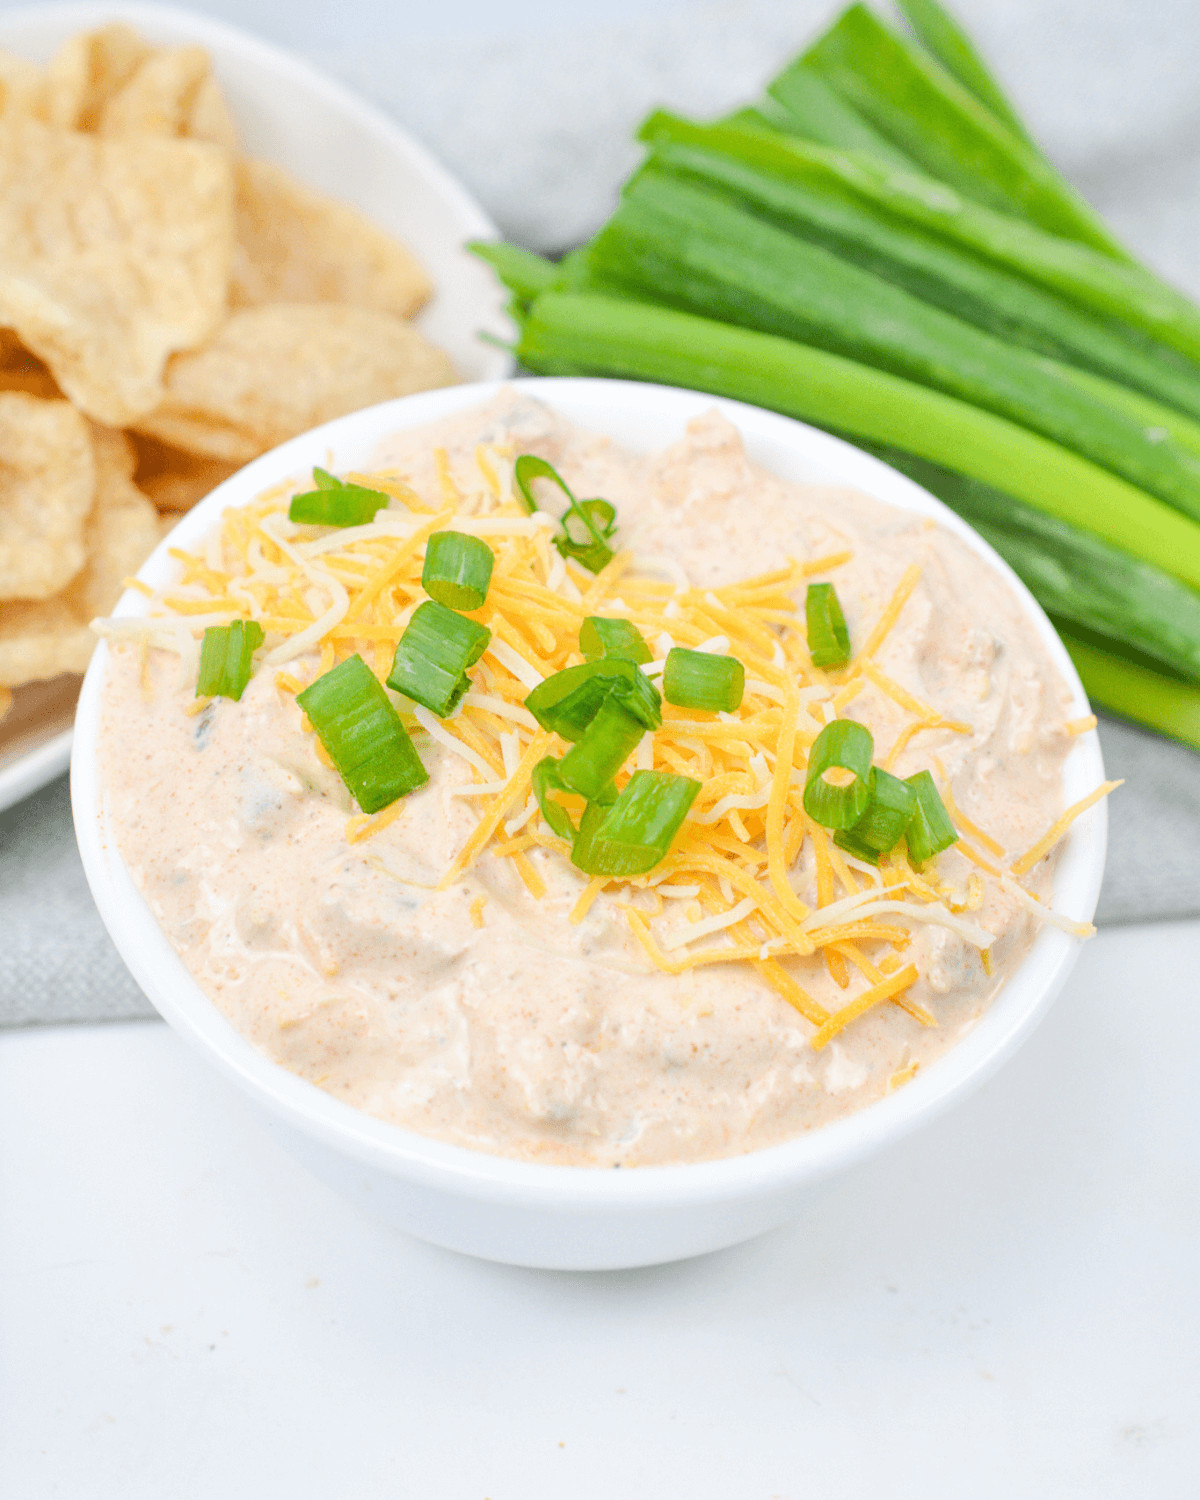 Cream Cheese Taco Dip with green onions, served alongside chips.